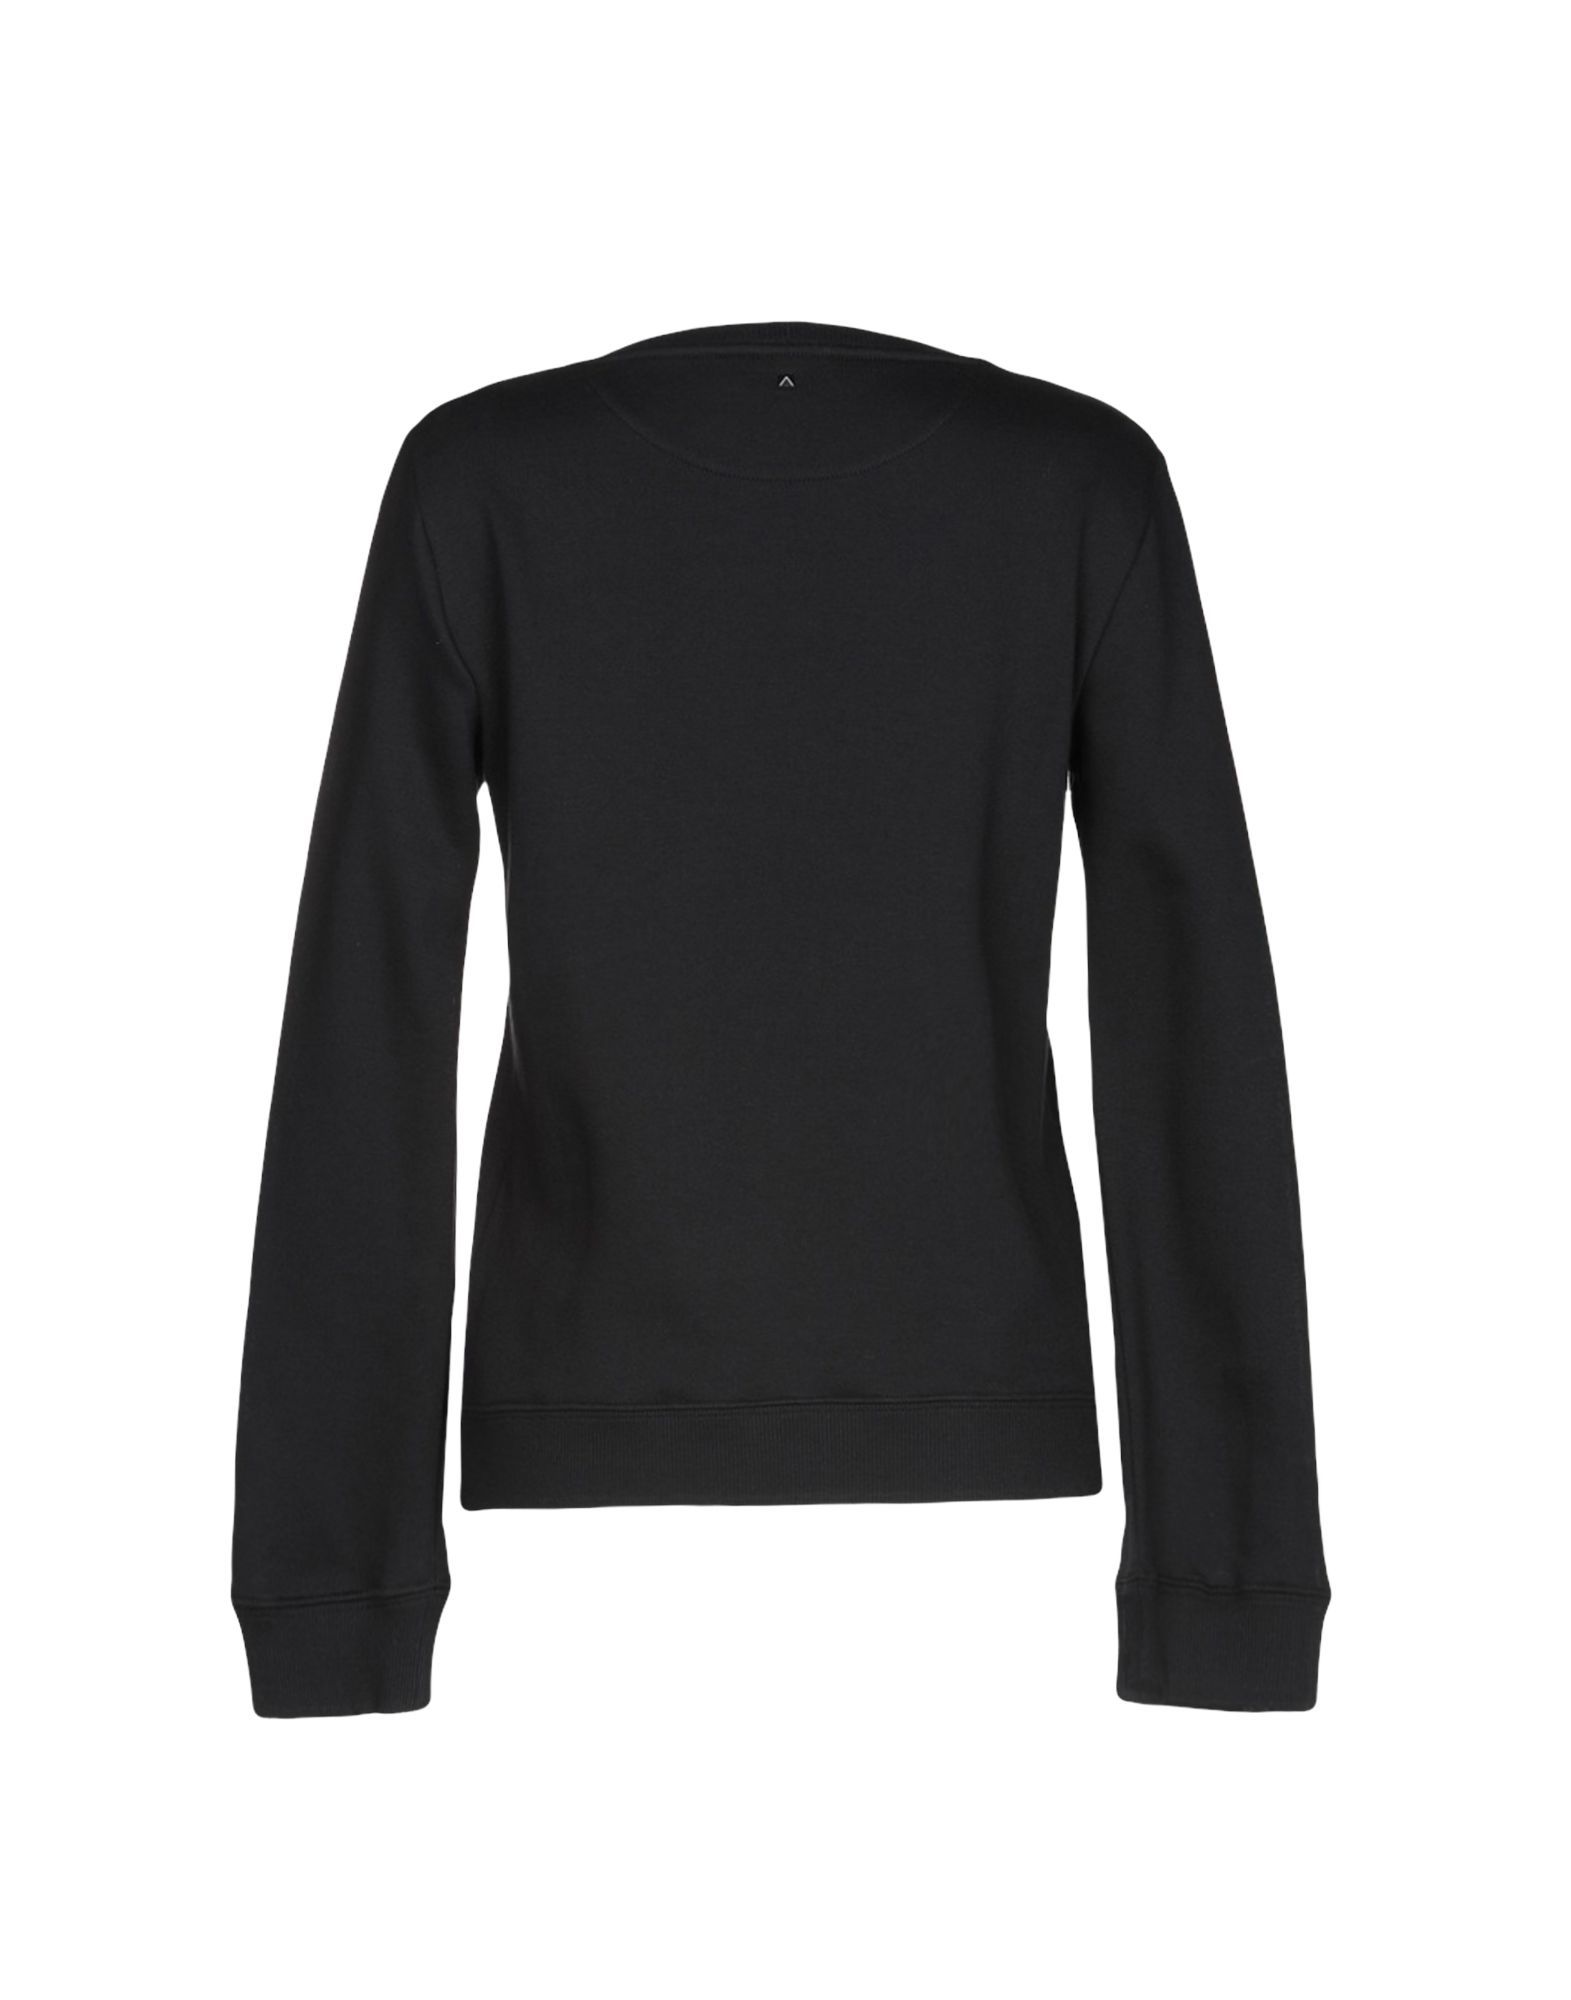 contrasting applications, solid colour, round collar, long sleeves, no pockets